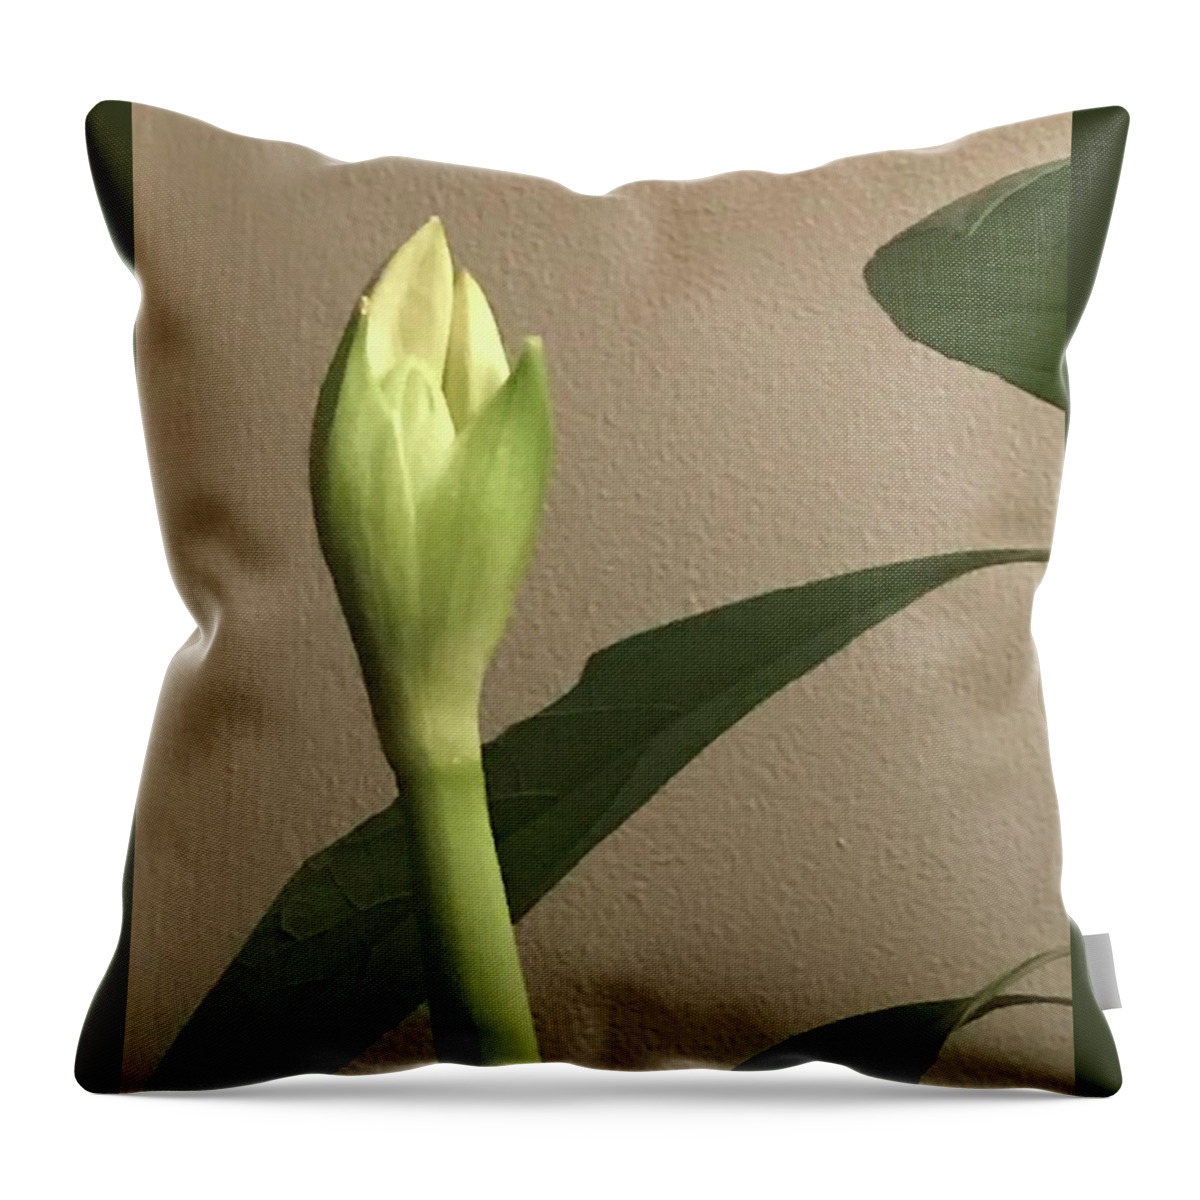 Amaryllis Bud Throw Pillow featuring the photograph Amaryllis Bud by Mary Kobet